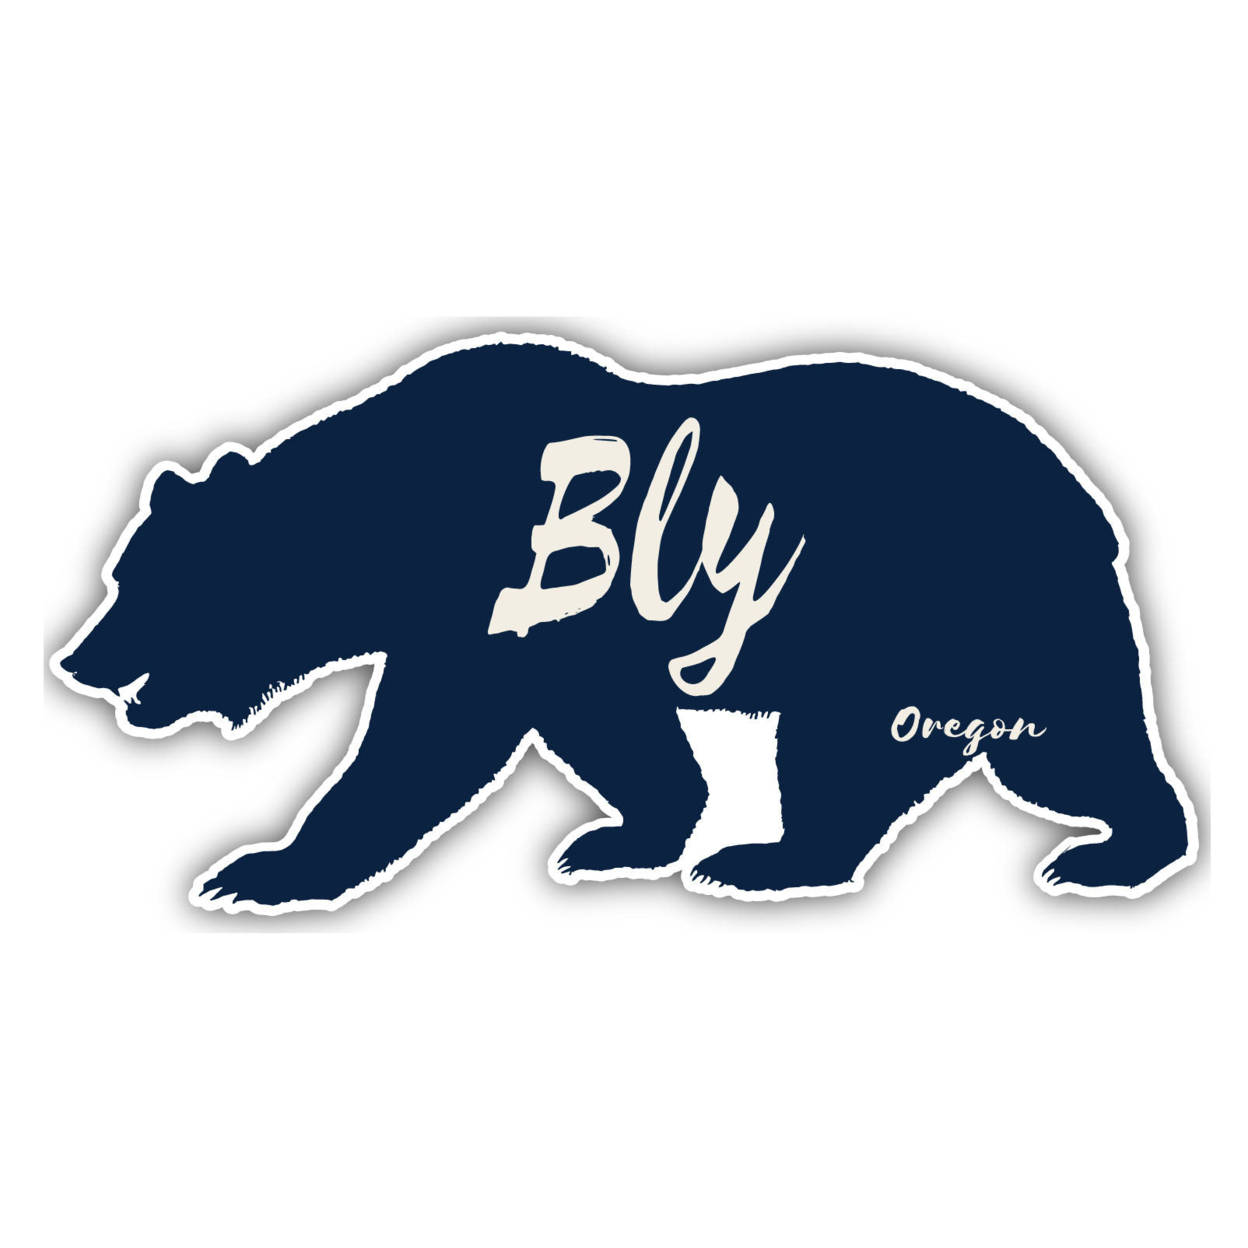 Bly Oregon Souvenir Decorative Stickers (Choose Theme And Size) - 4-Pack, 8-Inch, Great Outdoors